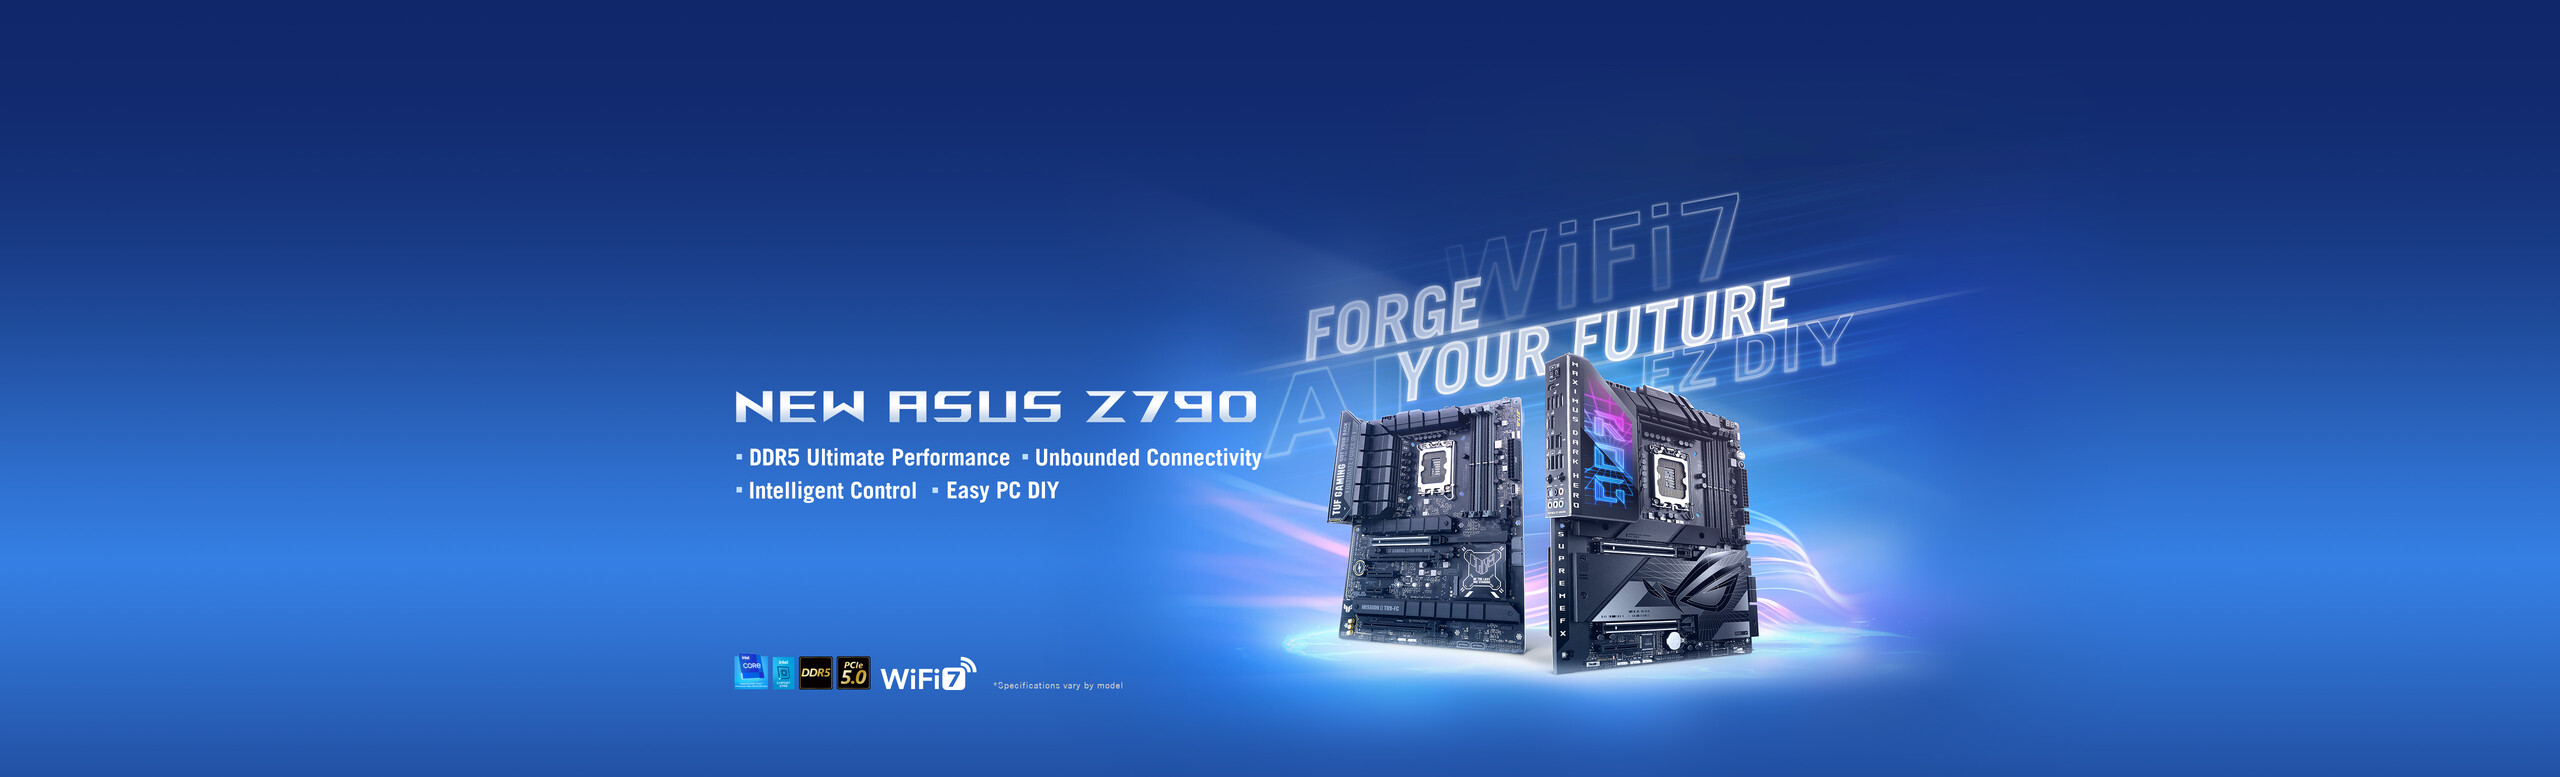 New ASUS Z790 Motherboards with 14th Gen Intel CPU support